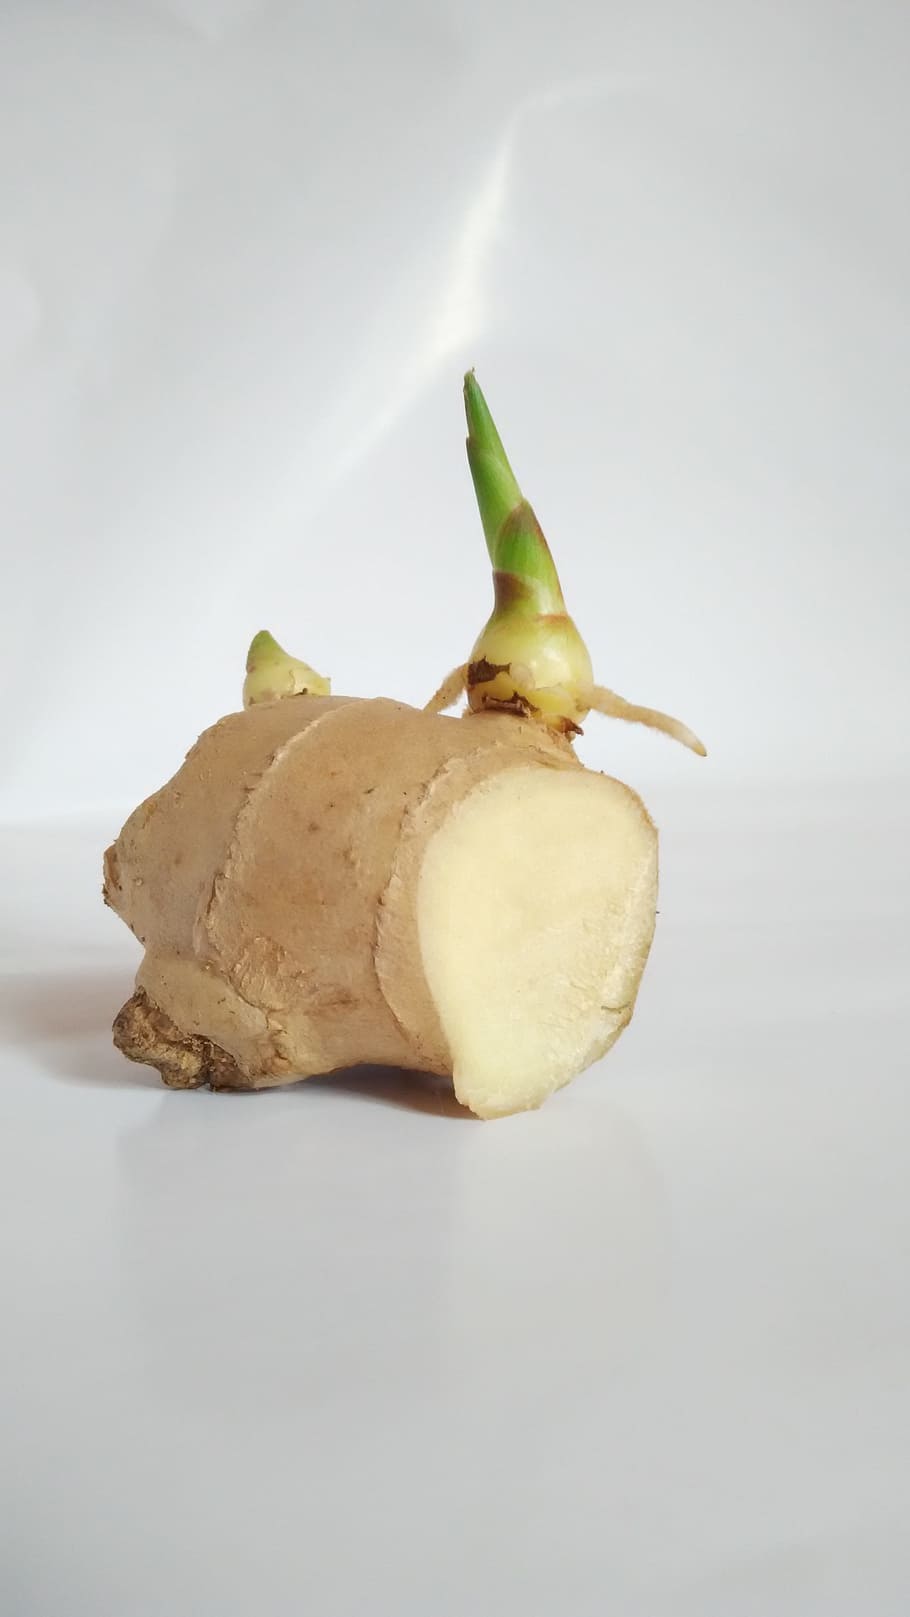 Ginger, Germination, ginger sprout, studio shot, food and drink